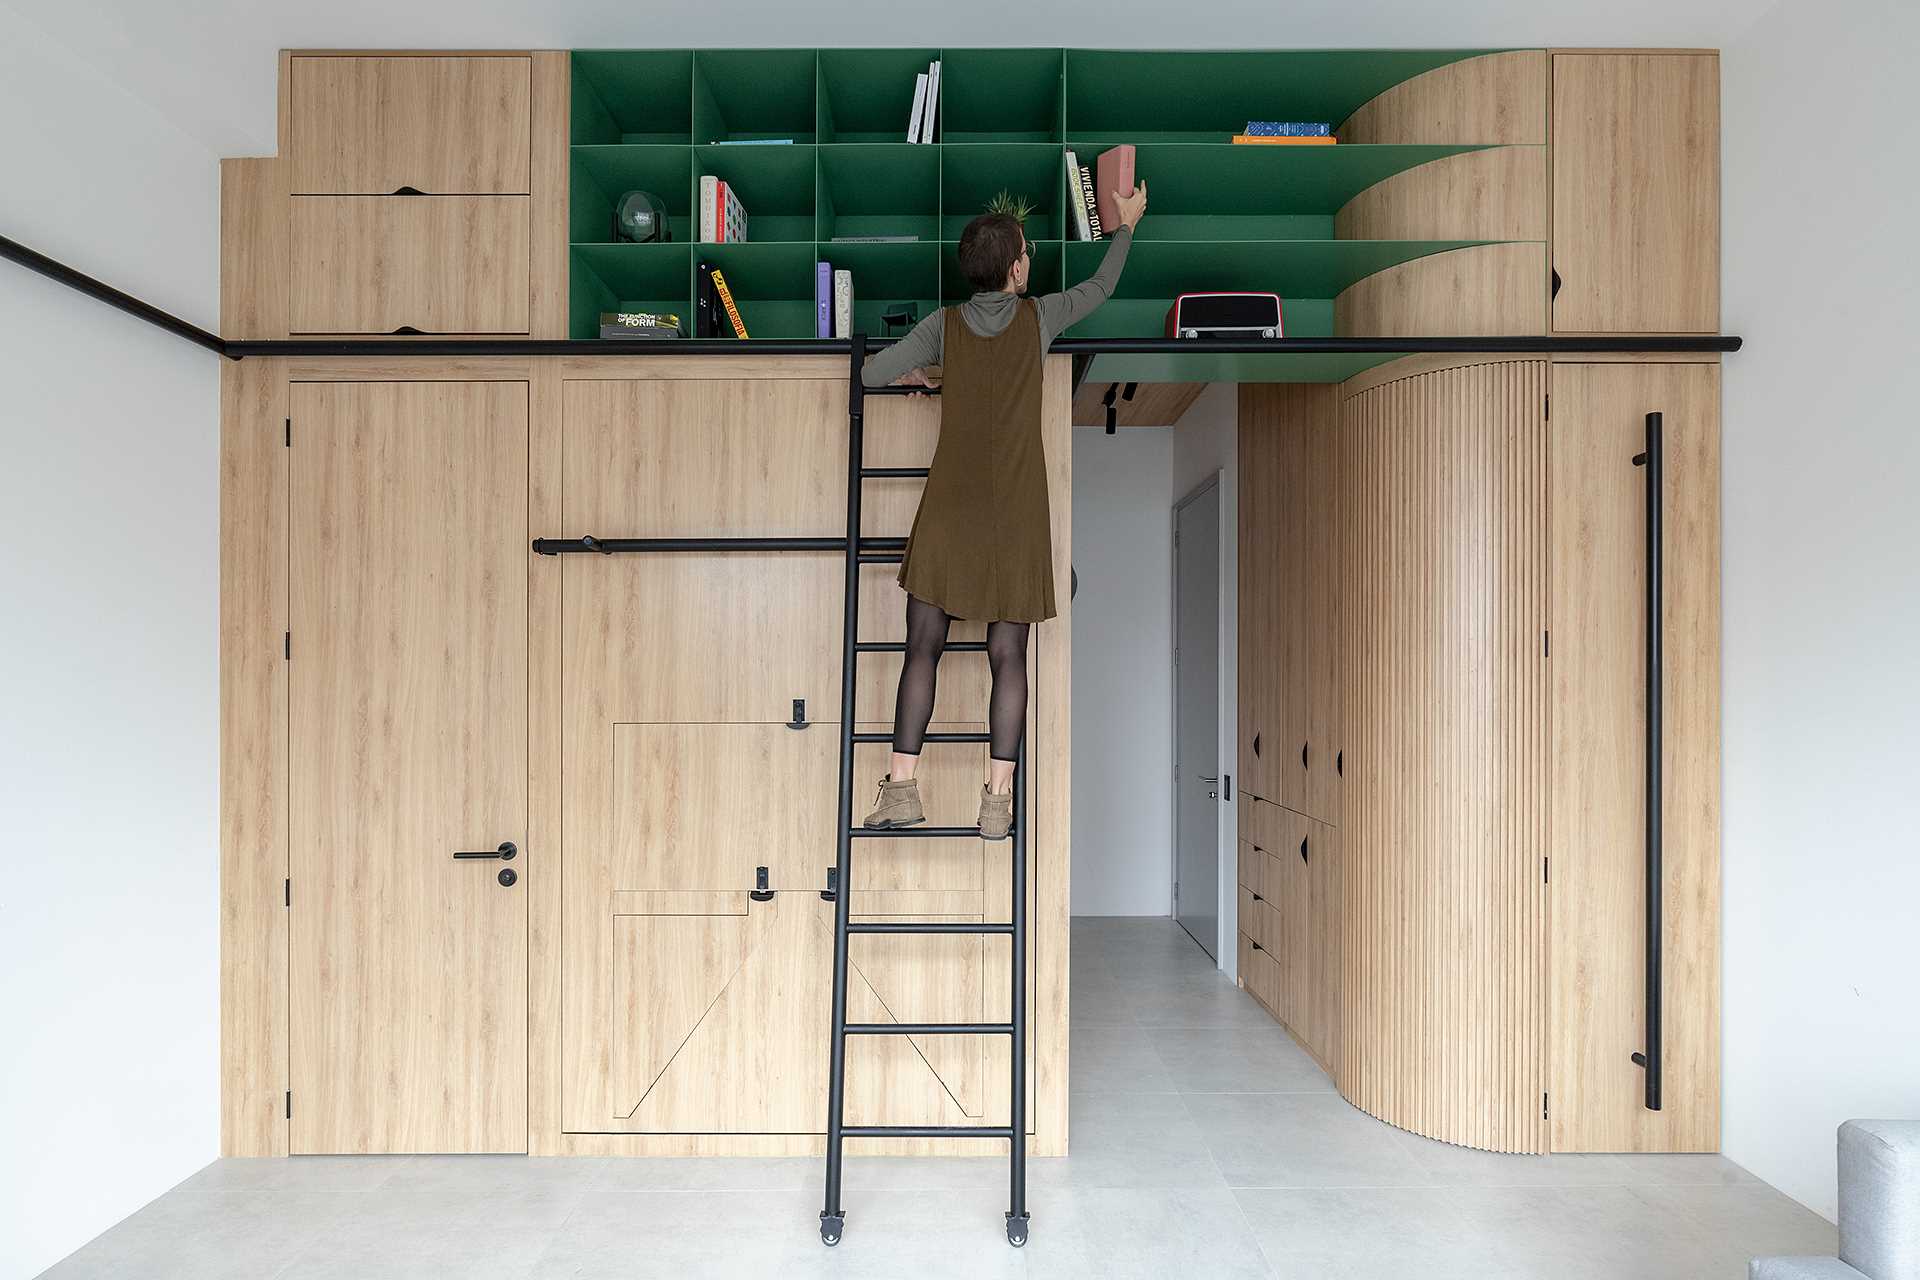 This small apartment includes a black metal ladder that allows the apartment owner to easily access the upper storage like the green shelves, as well as the cabinets above the kitchen.